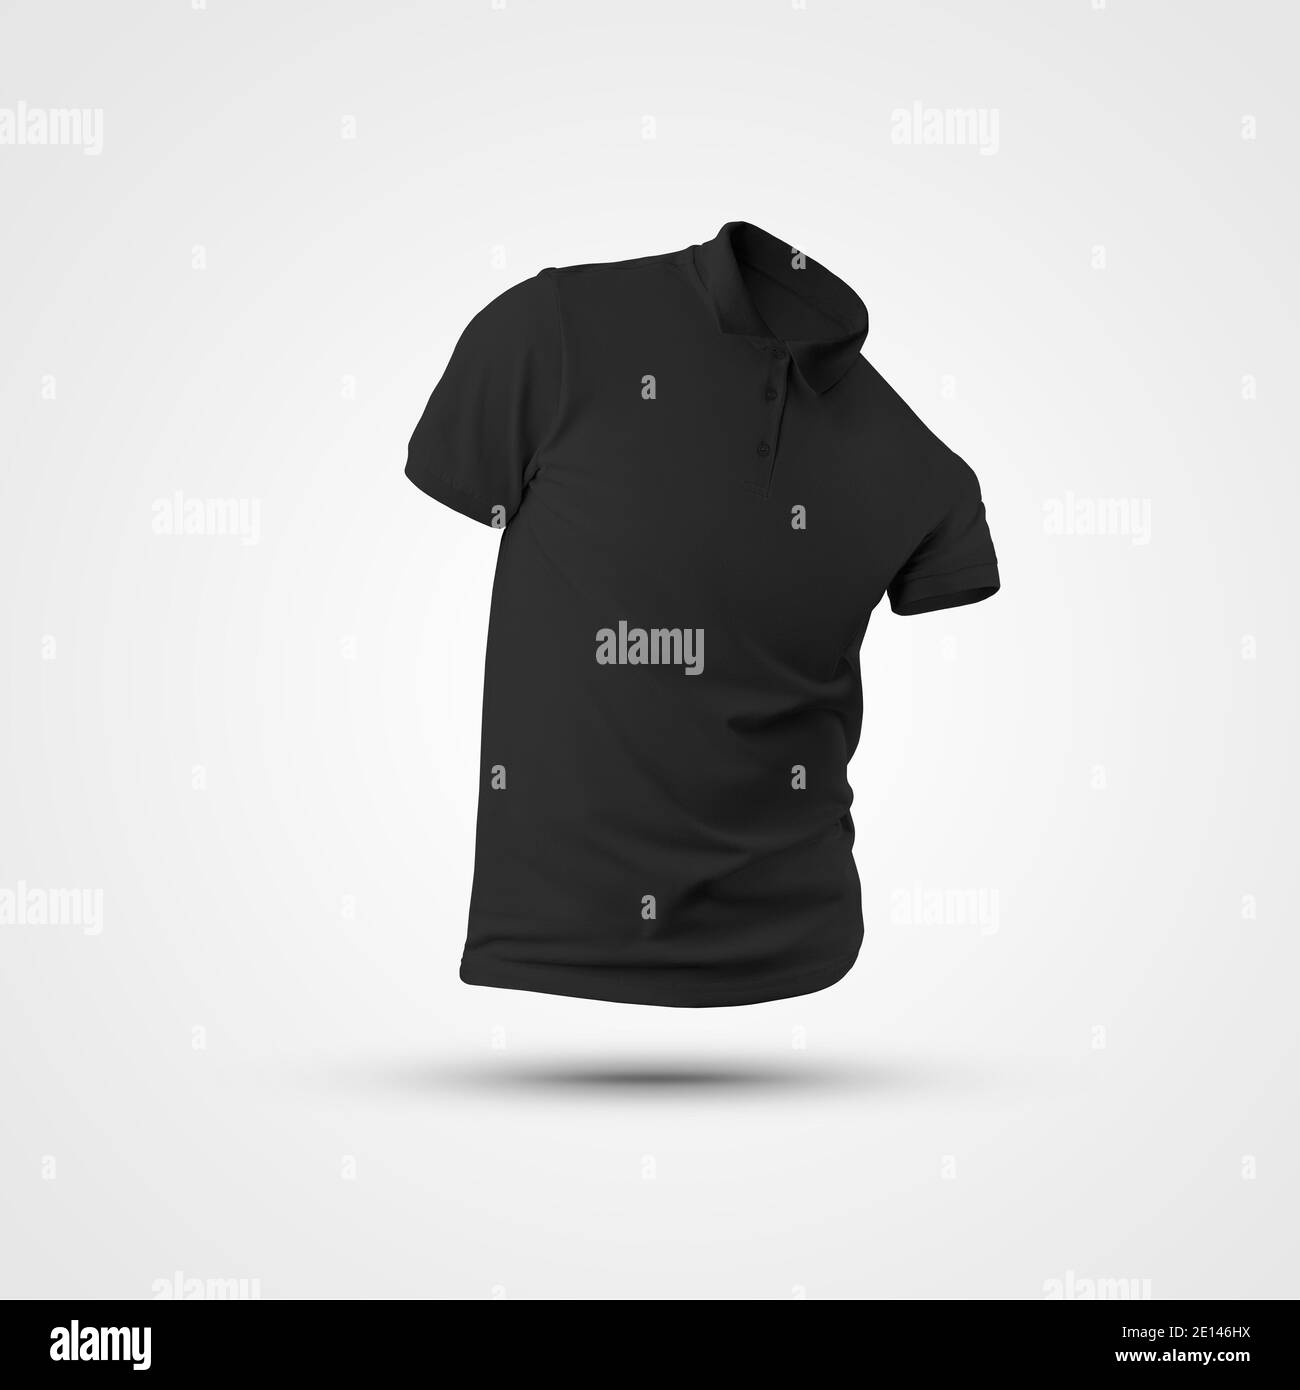 Shirt template Black and White Stock Photos & Images - Alamy